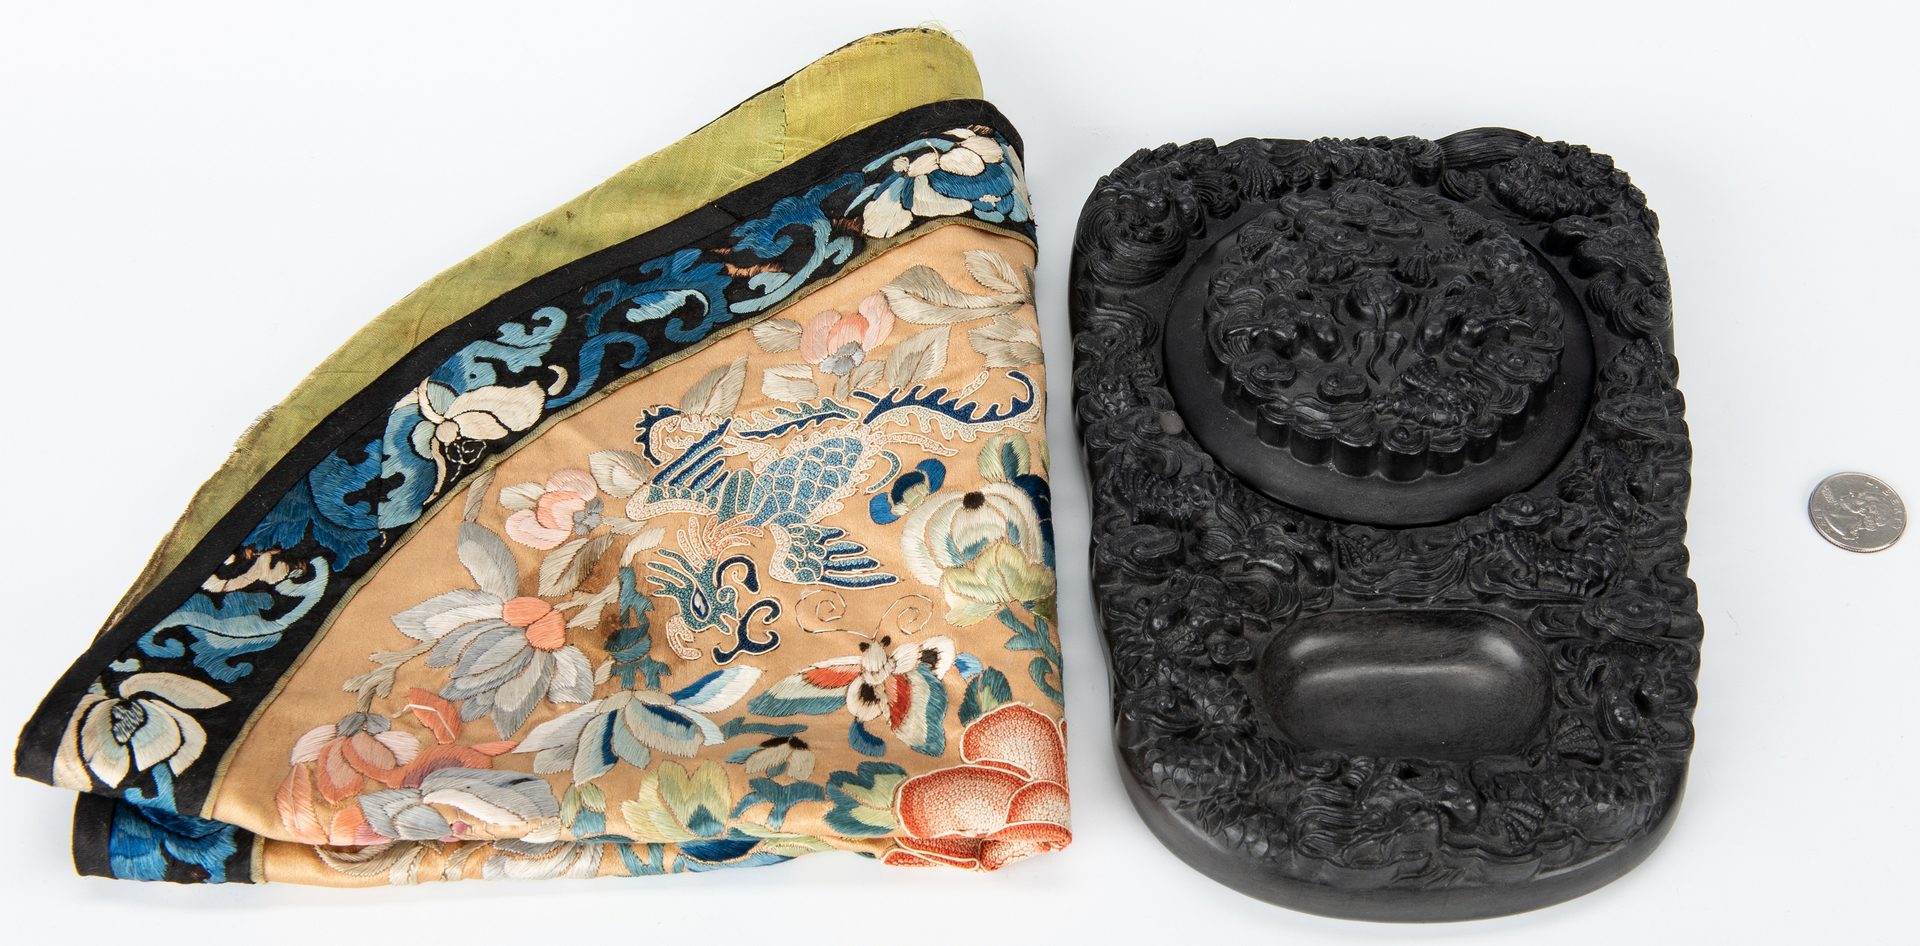 Lot 171: Chinese Carved Inkstone & Silk Embroidery, 2 items